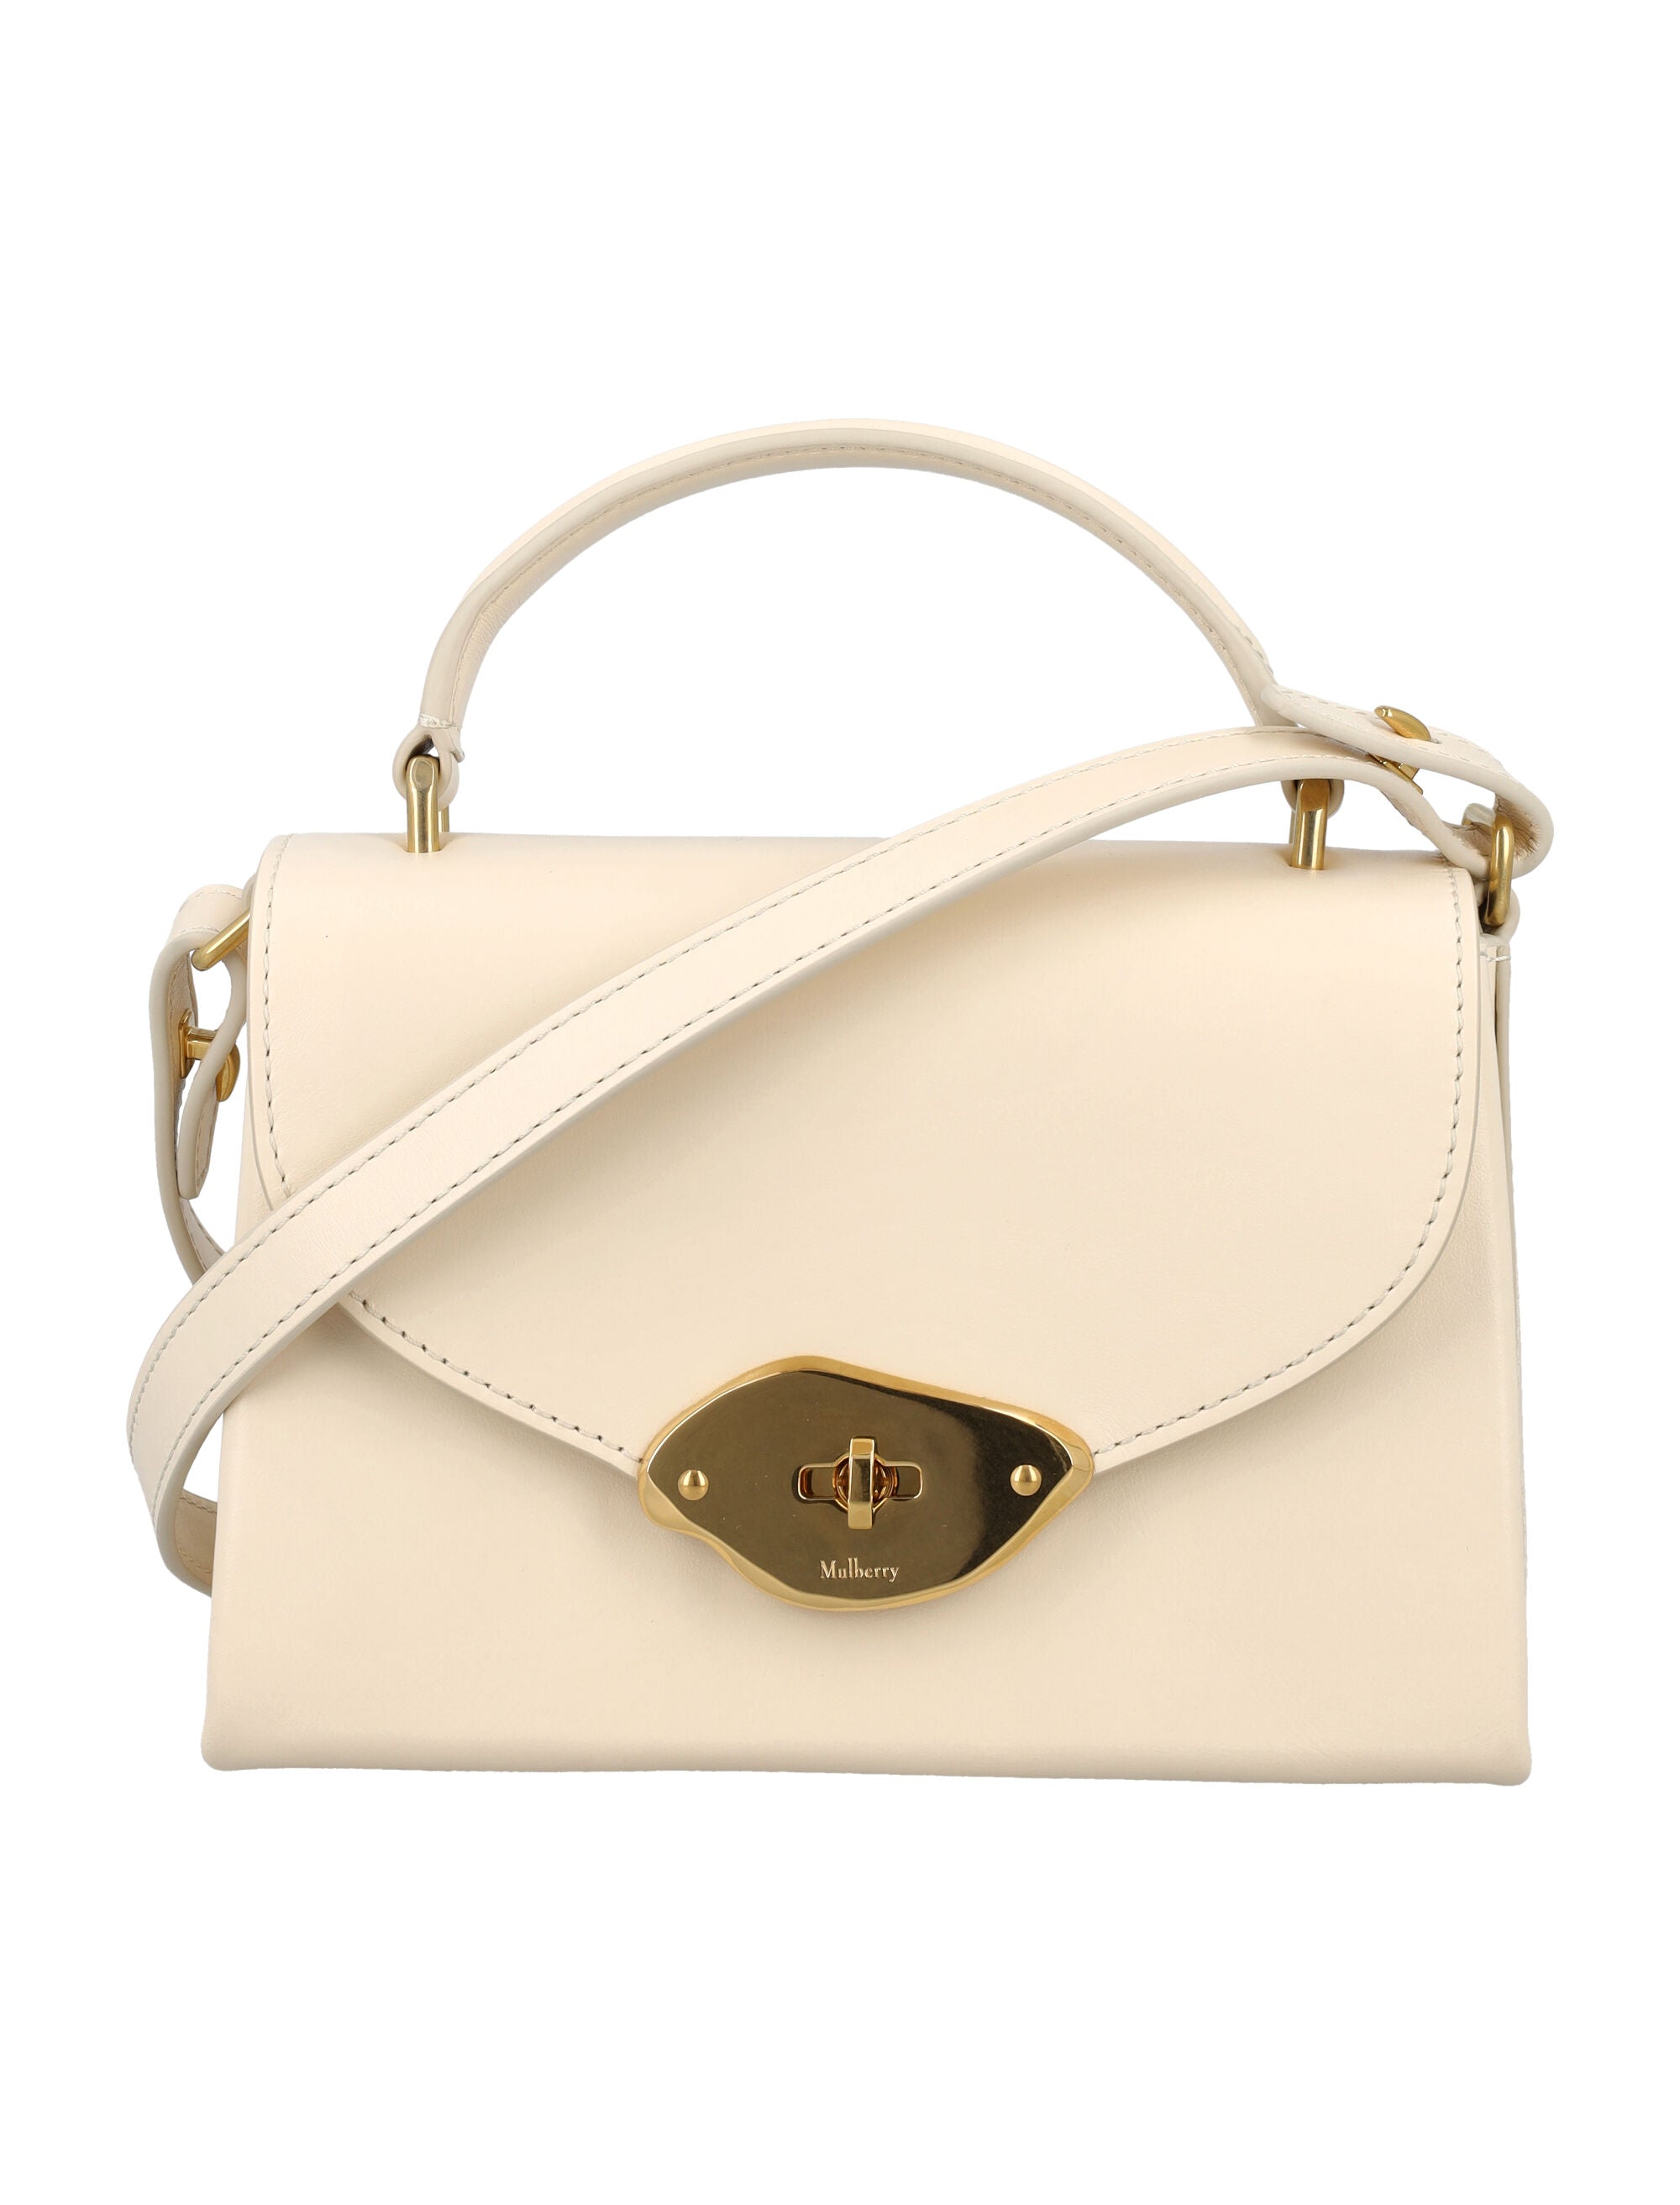 Shop Mulberry Elegant Mini Wool Top Handle Handbag With Brass Accents And Adjustable Leather Strap In White